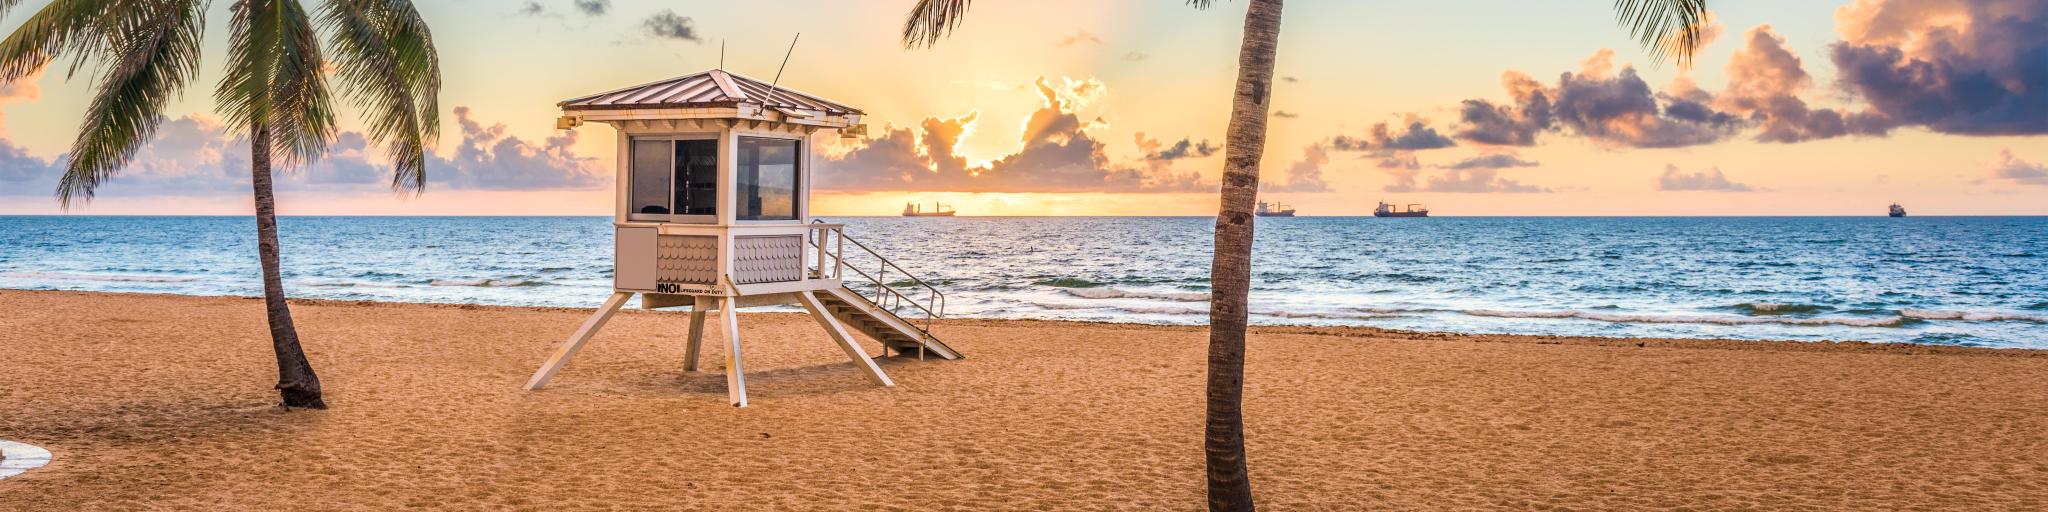 Fort Lauderdale, Florida, USA with the beach in the foreground and a few palm trees, a wooden platform in the middle and the sea in the background at sunset. 